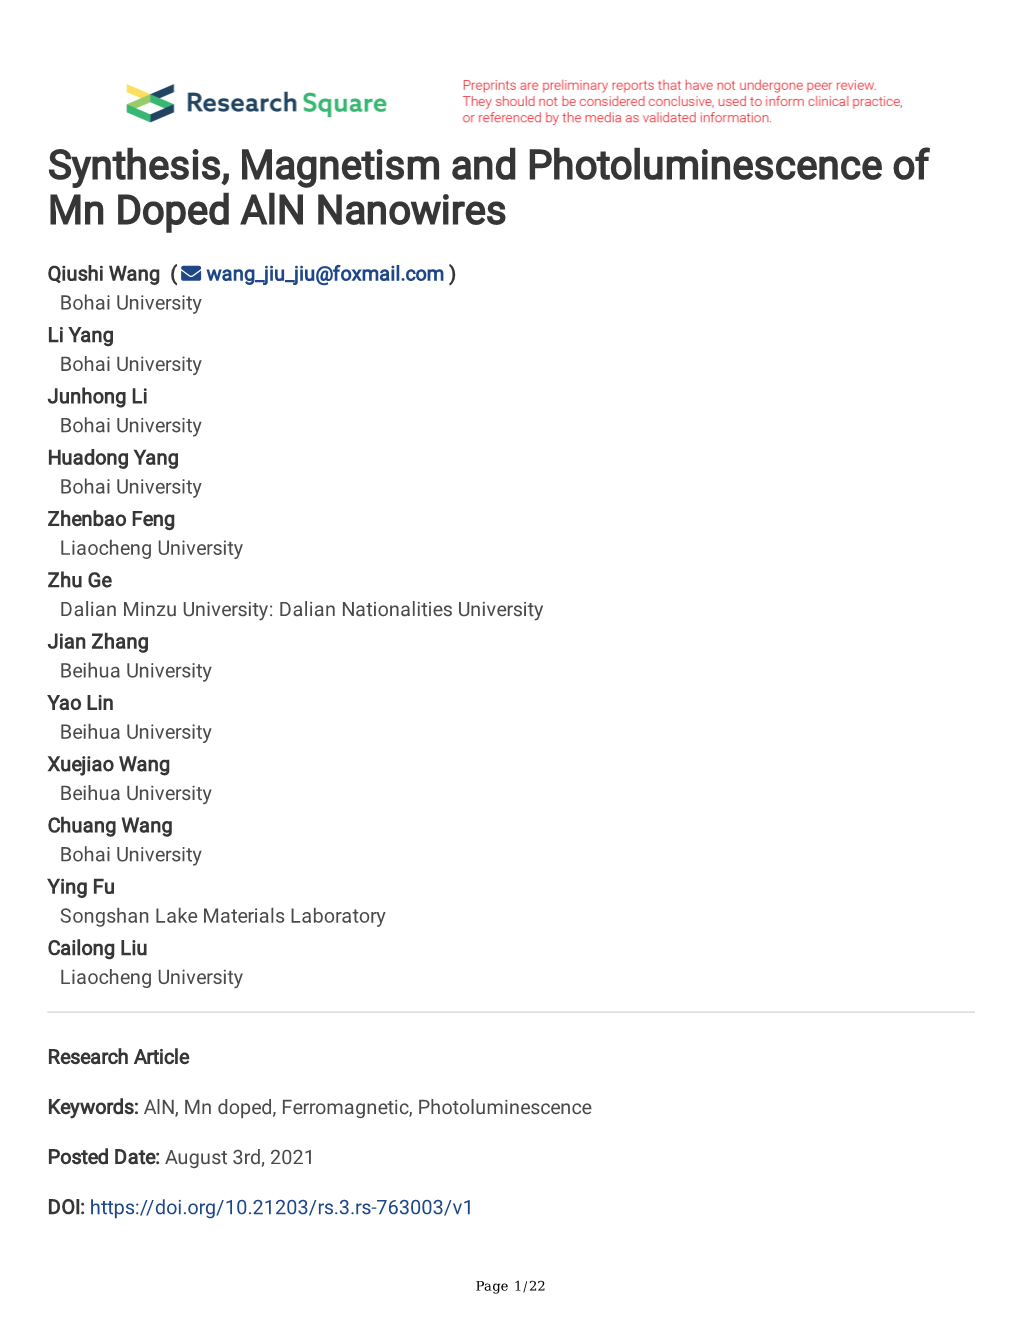 Synthesis, Magnetism and Photoluminescence of Mn Doped Aln Nanowires